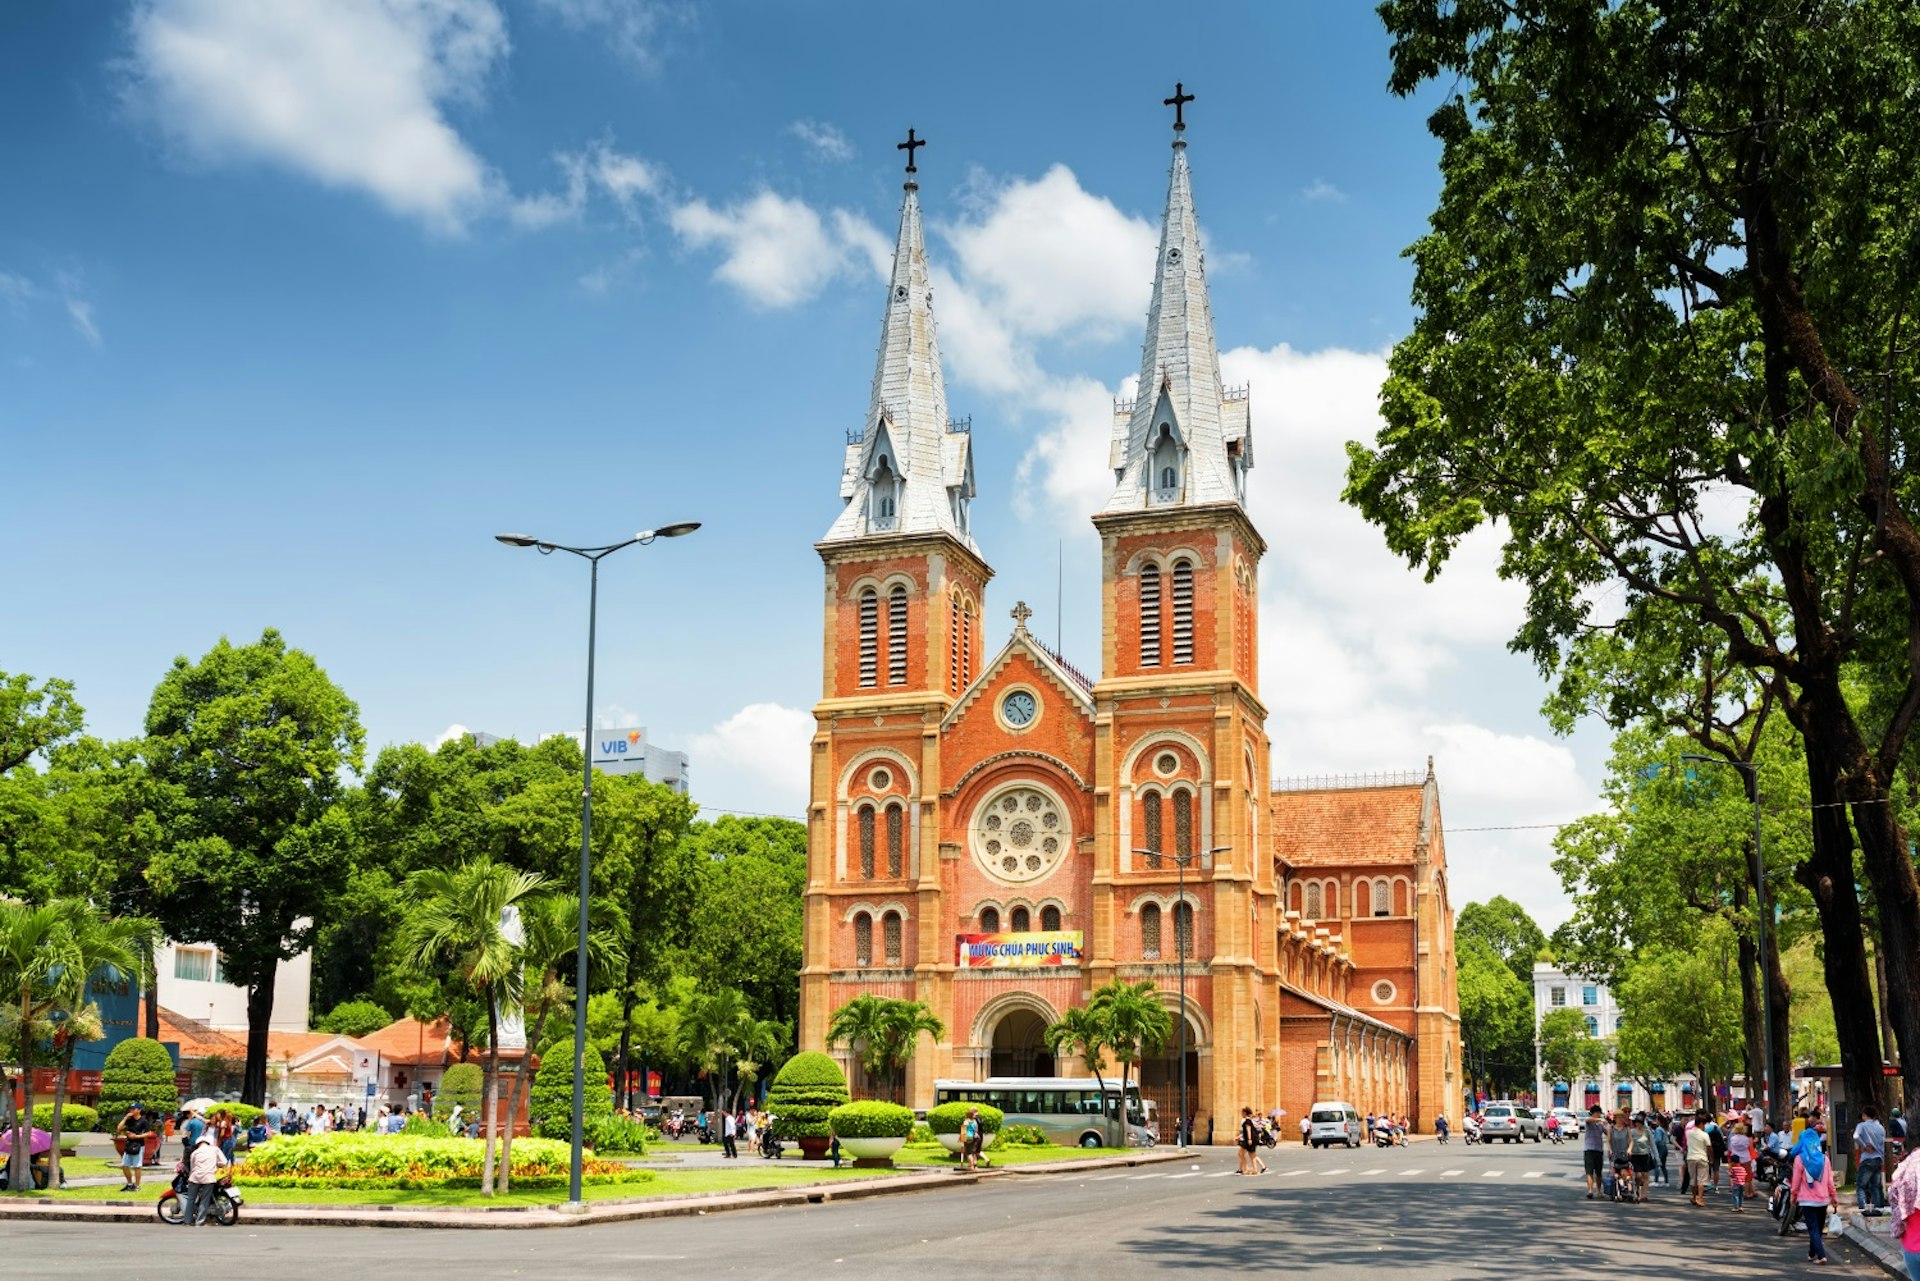 HCMC's Notre Dame Cathedral and the leafy surrounding square and street on a sunny, clear day © Efired / Shutterstock